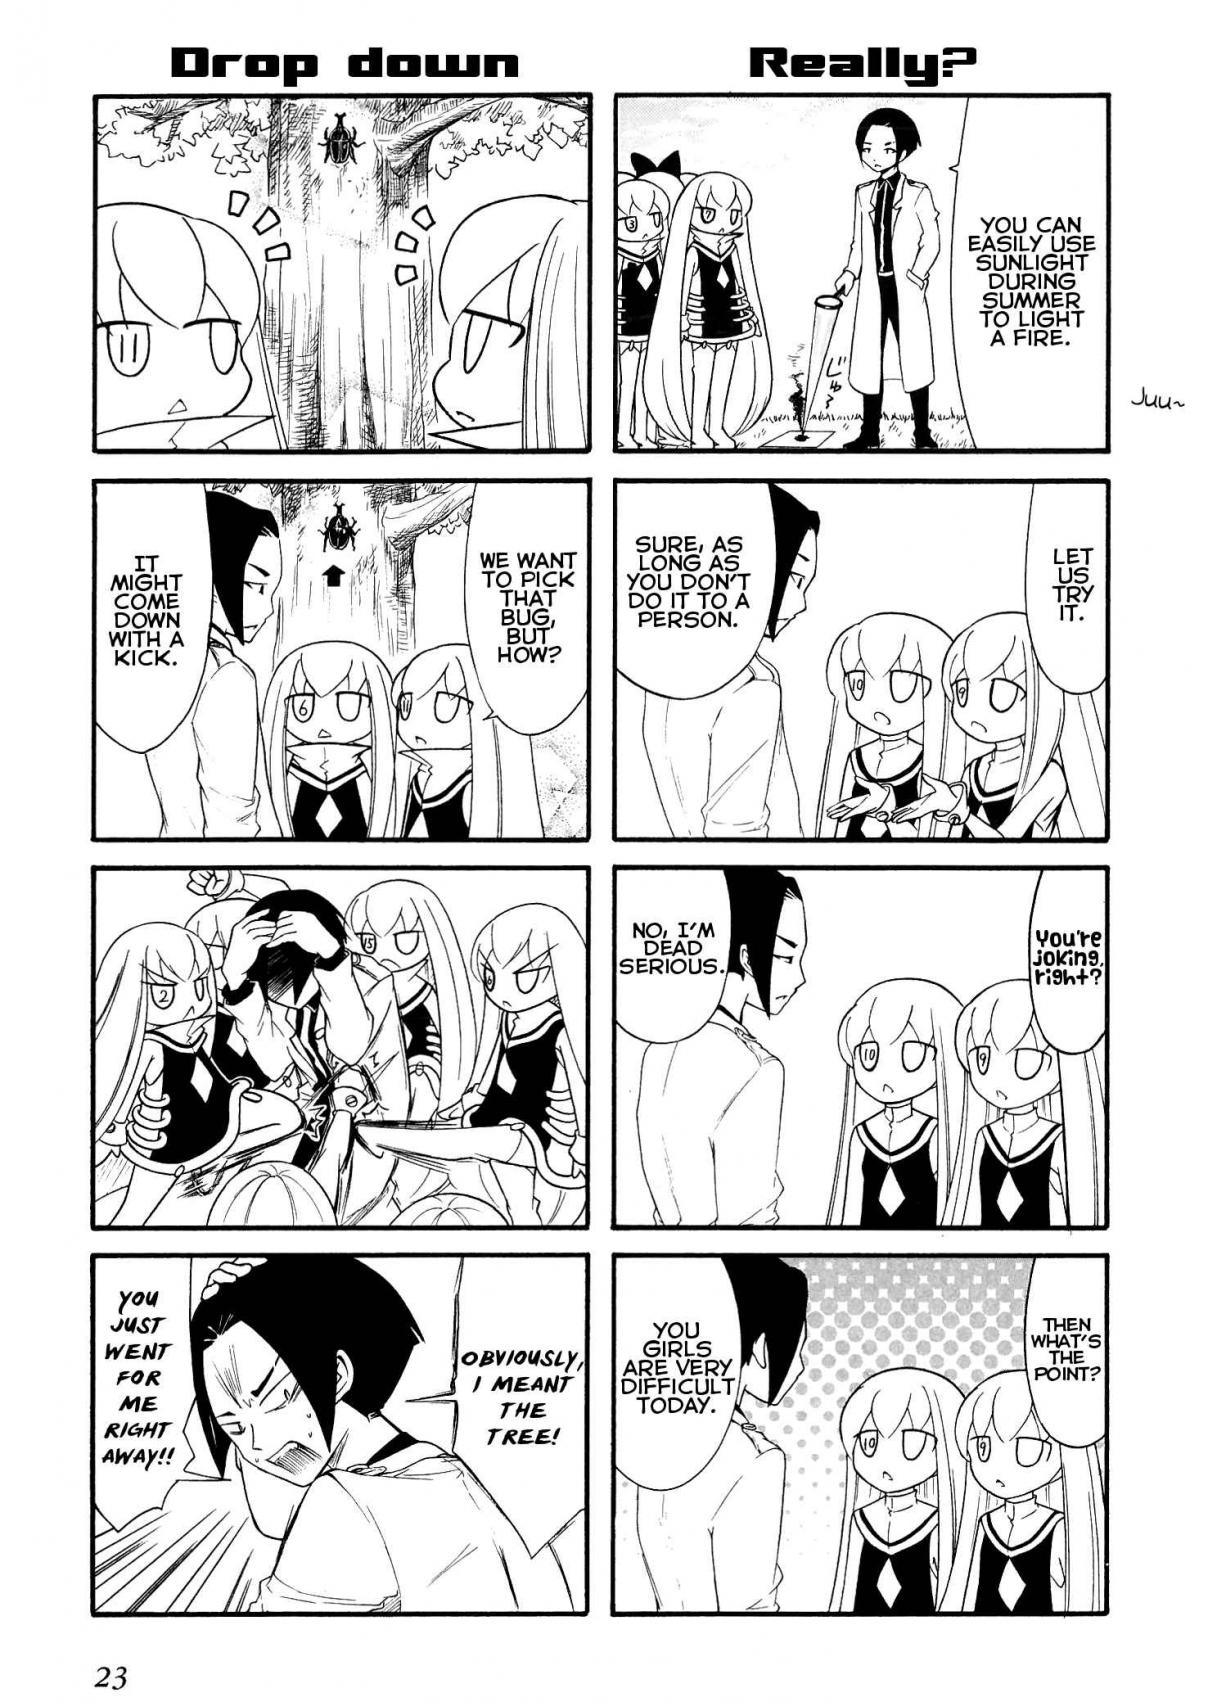 Number Girl Vol. 2 Ch. 21